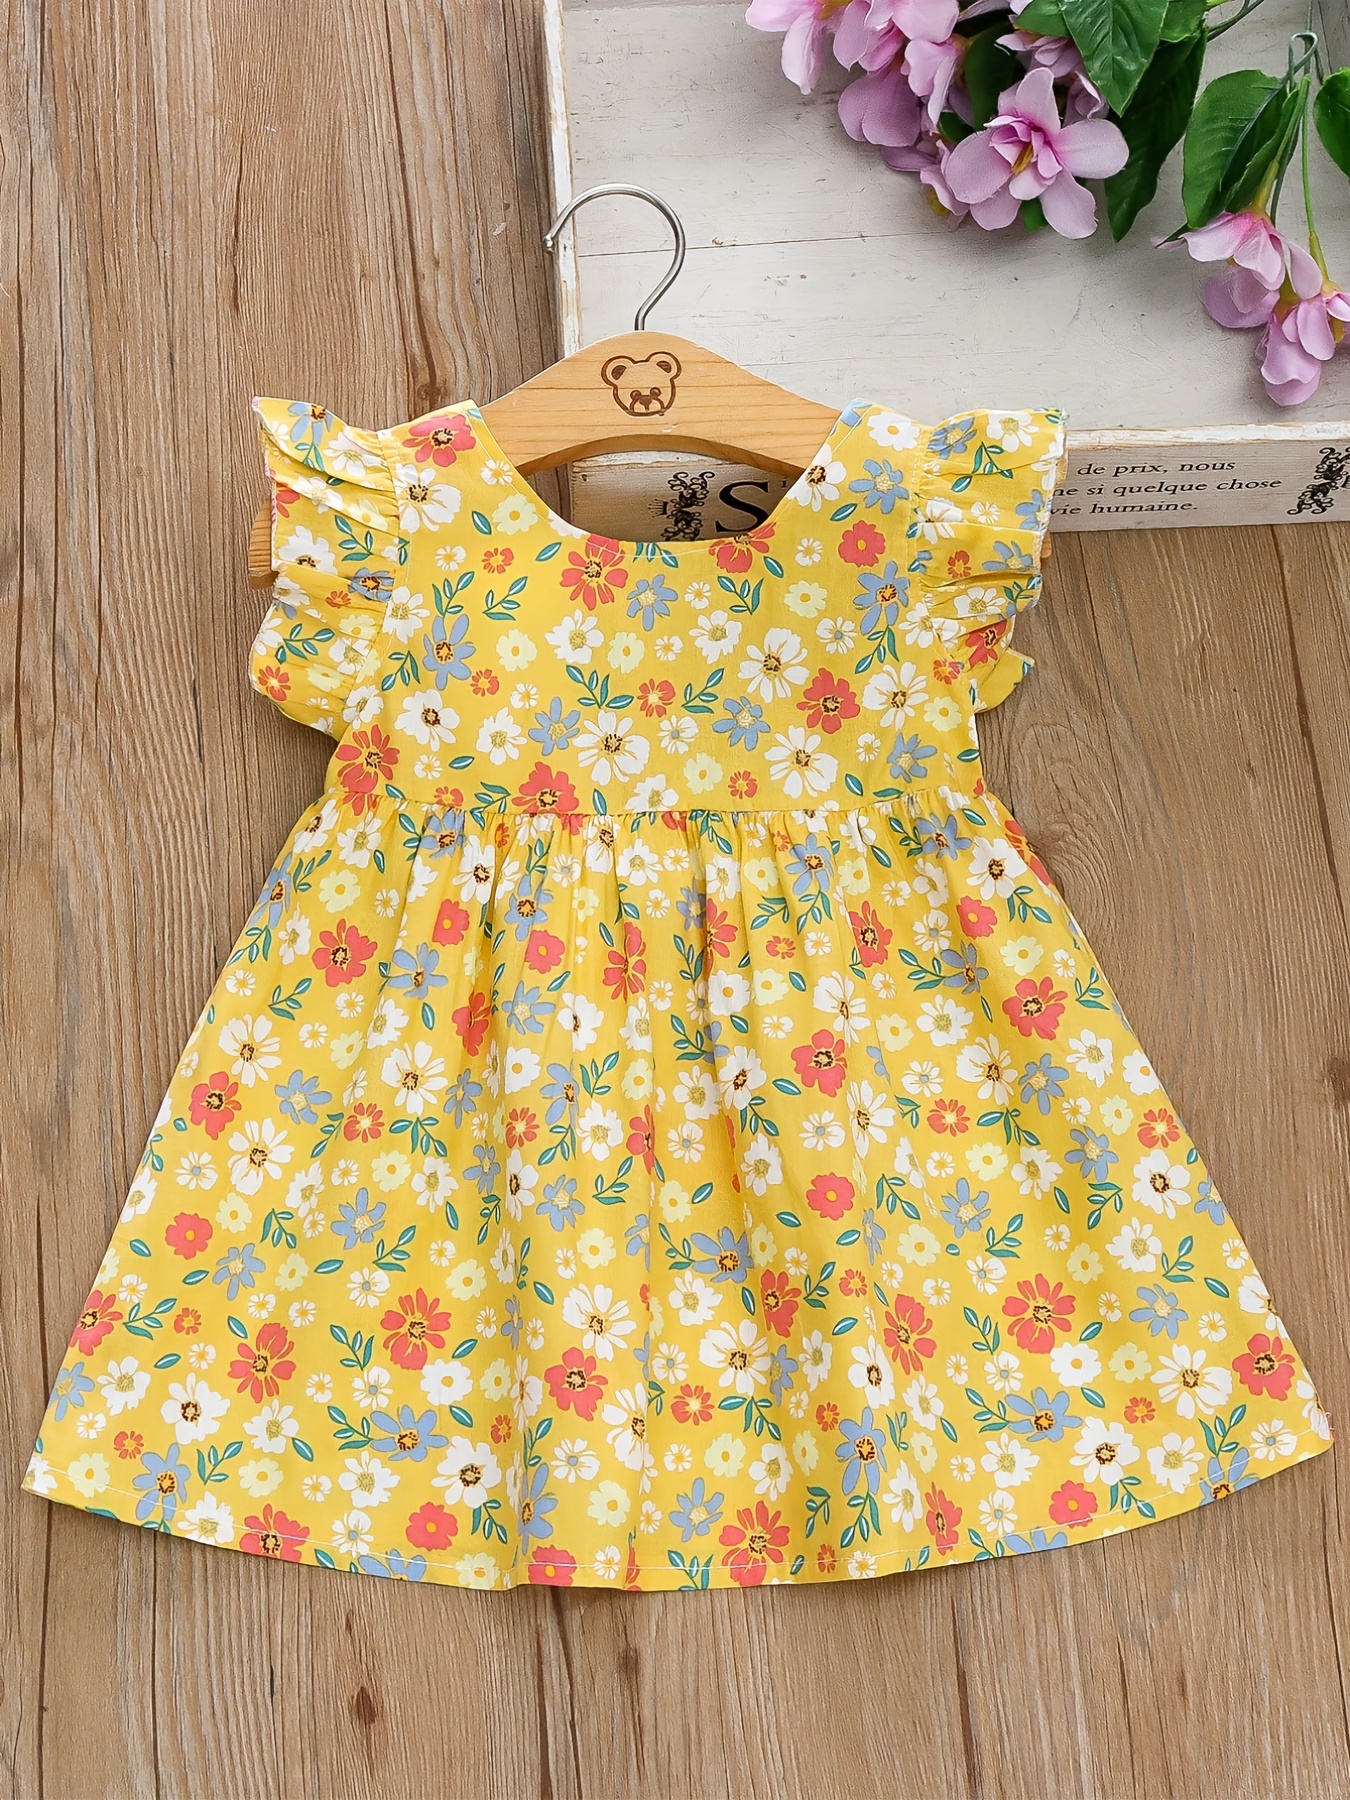 Baby Girls Floral Print Fly Sleeve Dress Clothes on Our Store